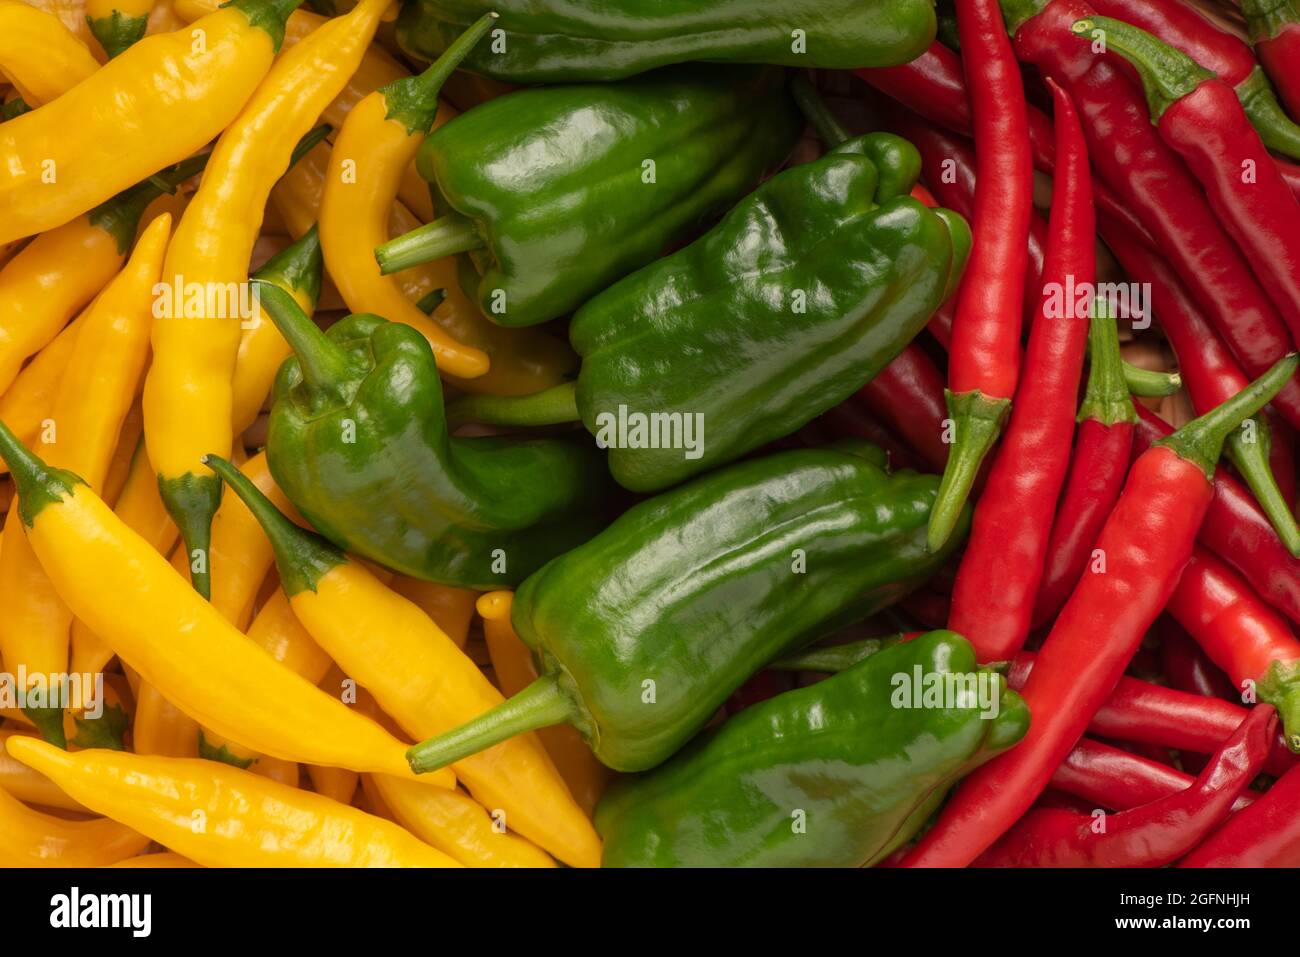 Yellow ( Aji Limon ), green ( Padron ) and red ( Ring of Fire ) chilli peppers. Stock Photo